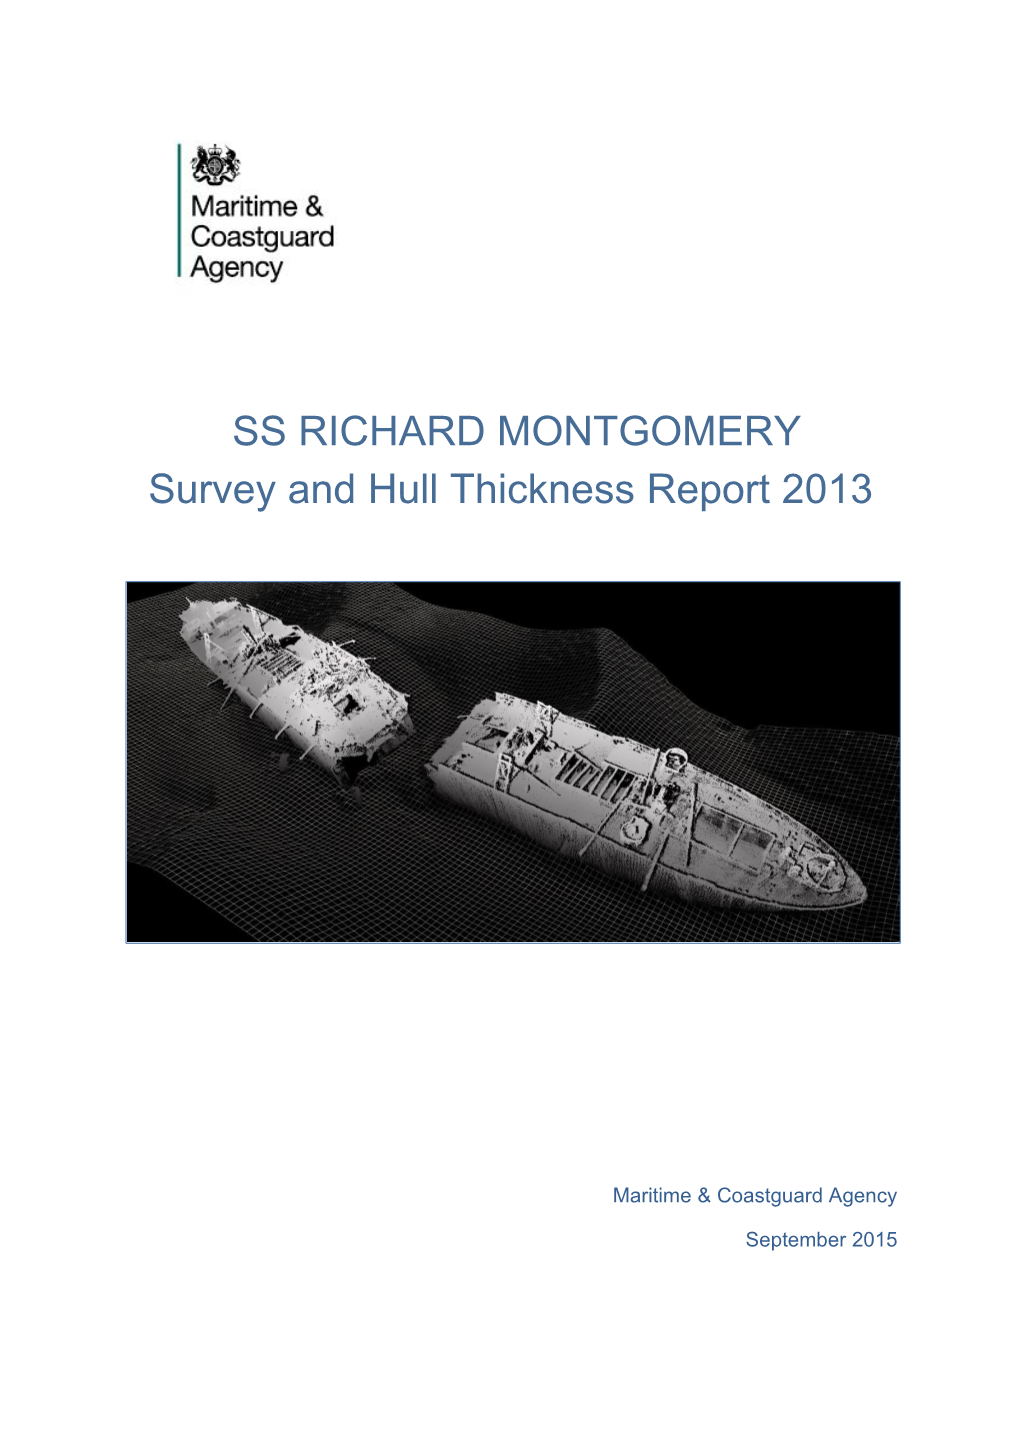 SS RICHARD MONTGOMERY Survey and Hull Thickness Report 2013